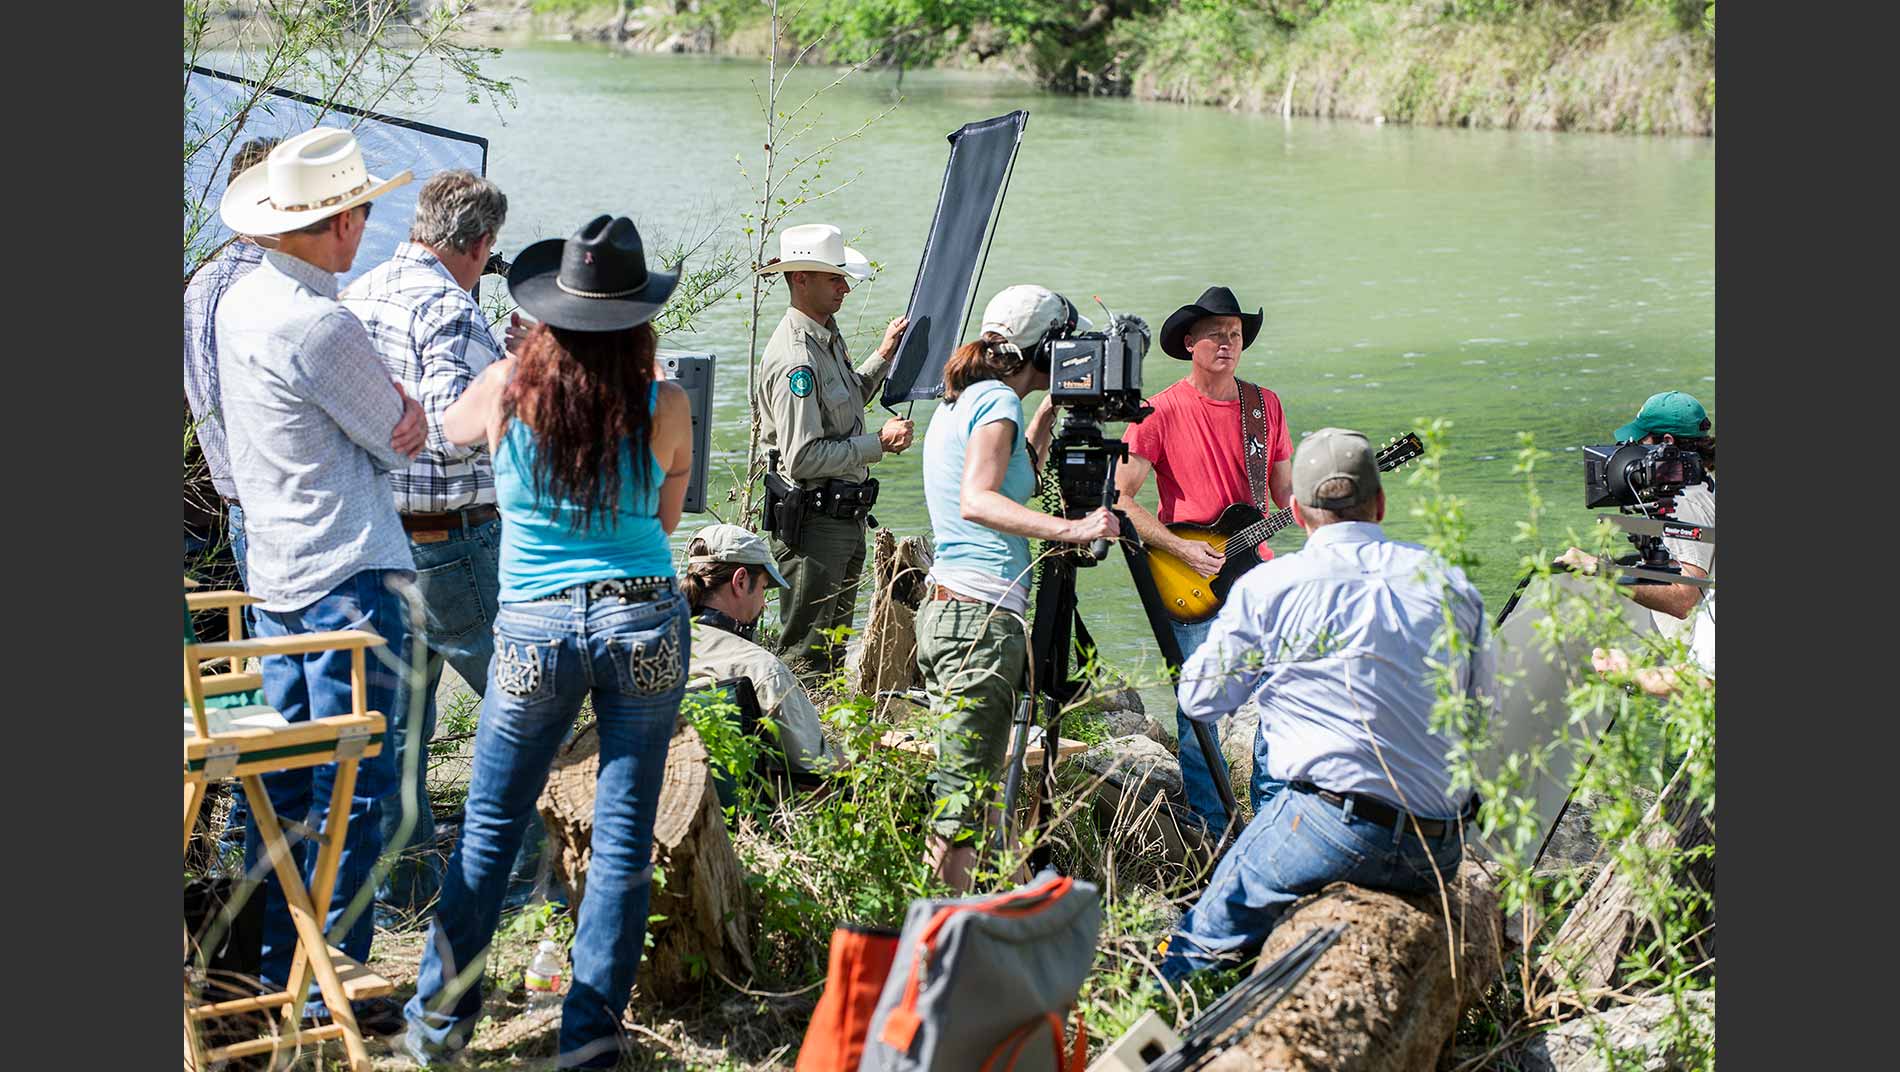 It took a pretty big crew to shoot a public service announcement with musician Kevin Fowler.